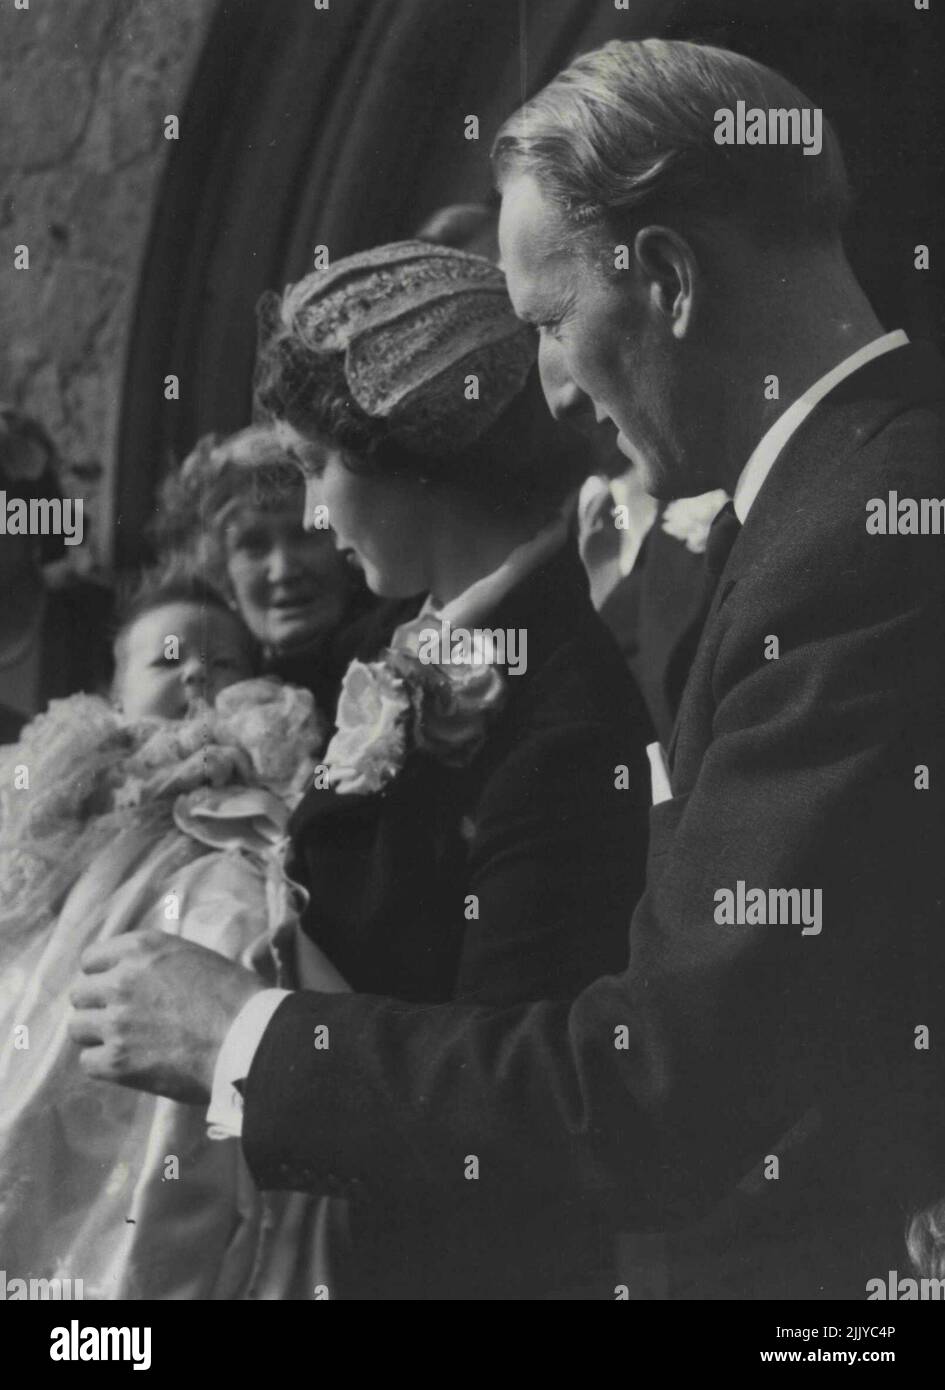 The Earl and Countess of Dalkeith pictures with their baby Son, Lord Eskdaill, heir to the title, after the baby's christening Yesterday at holy Trinity Church, Melrose, Roxburghshire. He was given the names Richard Walter John. Lady Dalkeith acted as proxy for Princess Margaret, who is one of the godmothers. April 08, 1954. (Photo by Daily Mirror). Stock Photo